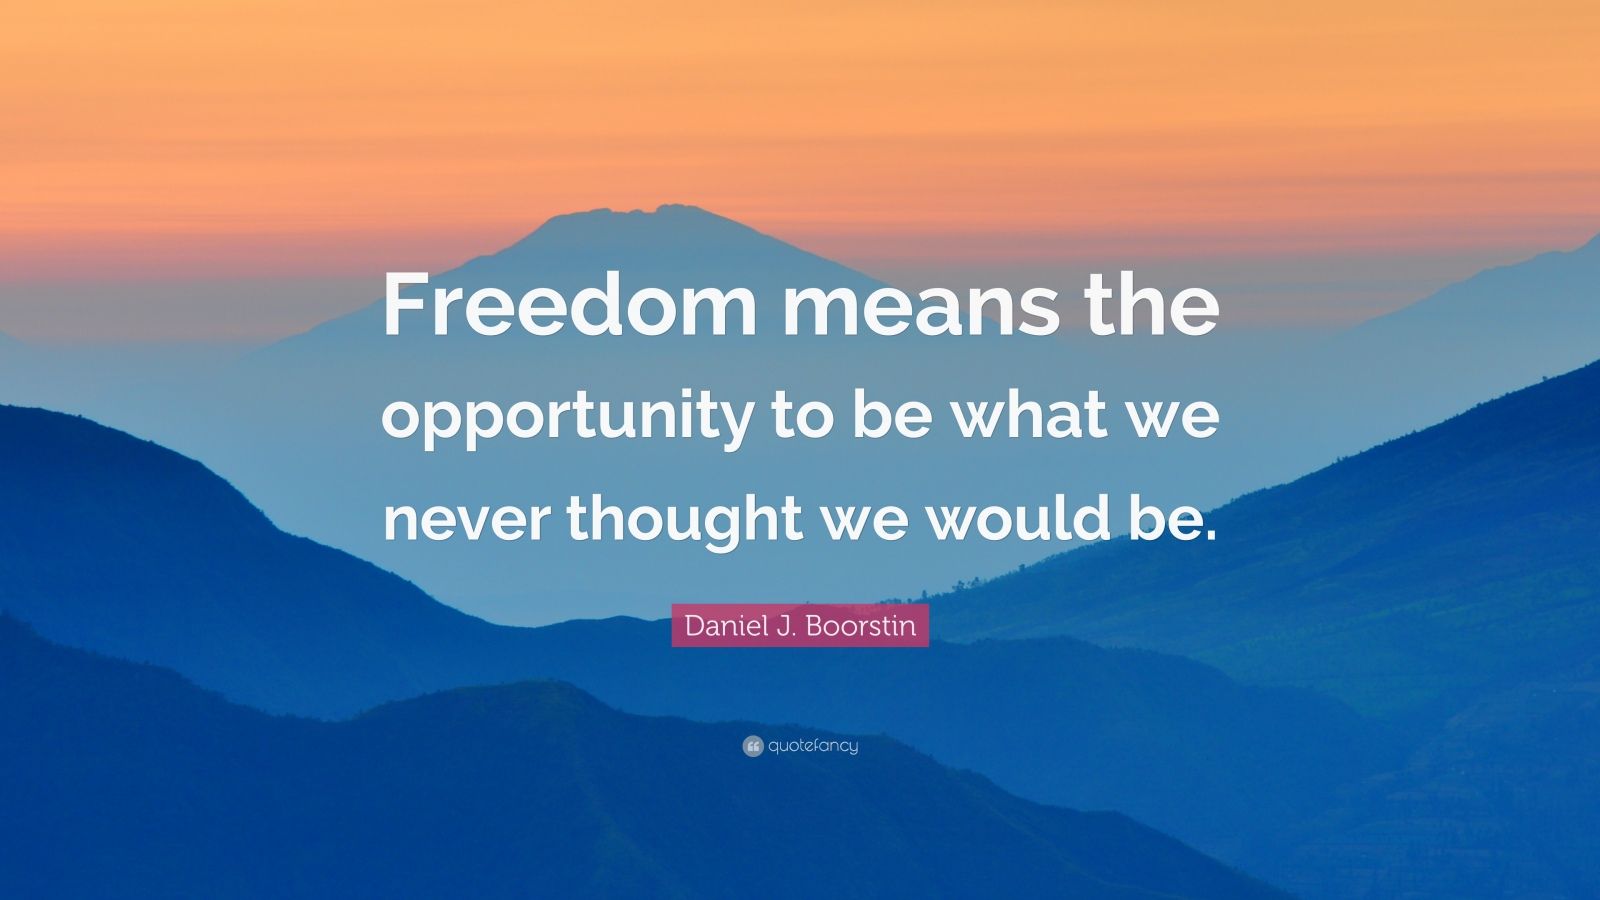 Daniel J. Boorstin Quote: “Freedom means the opportunity to be what we ...